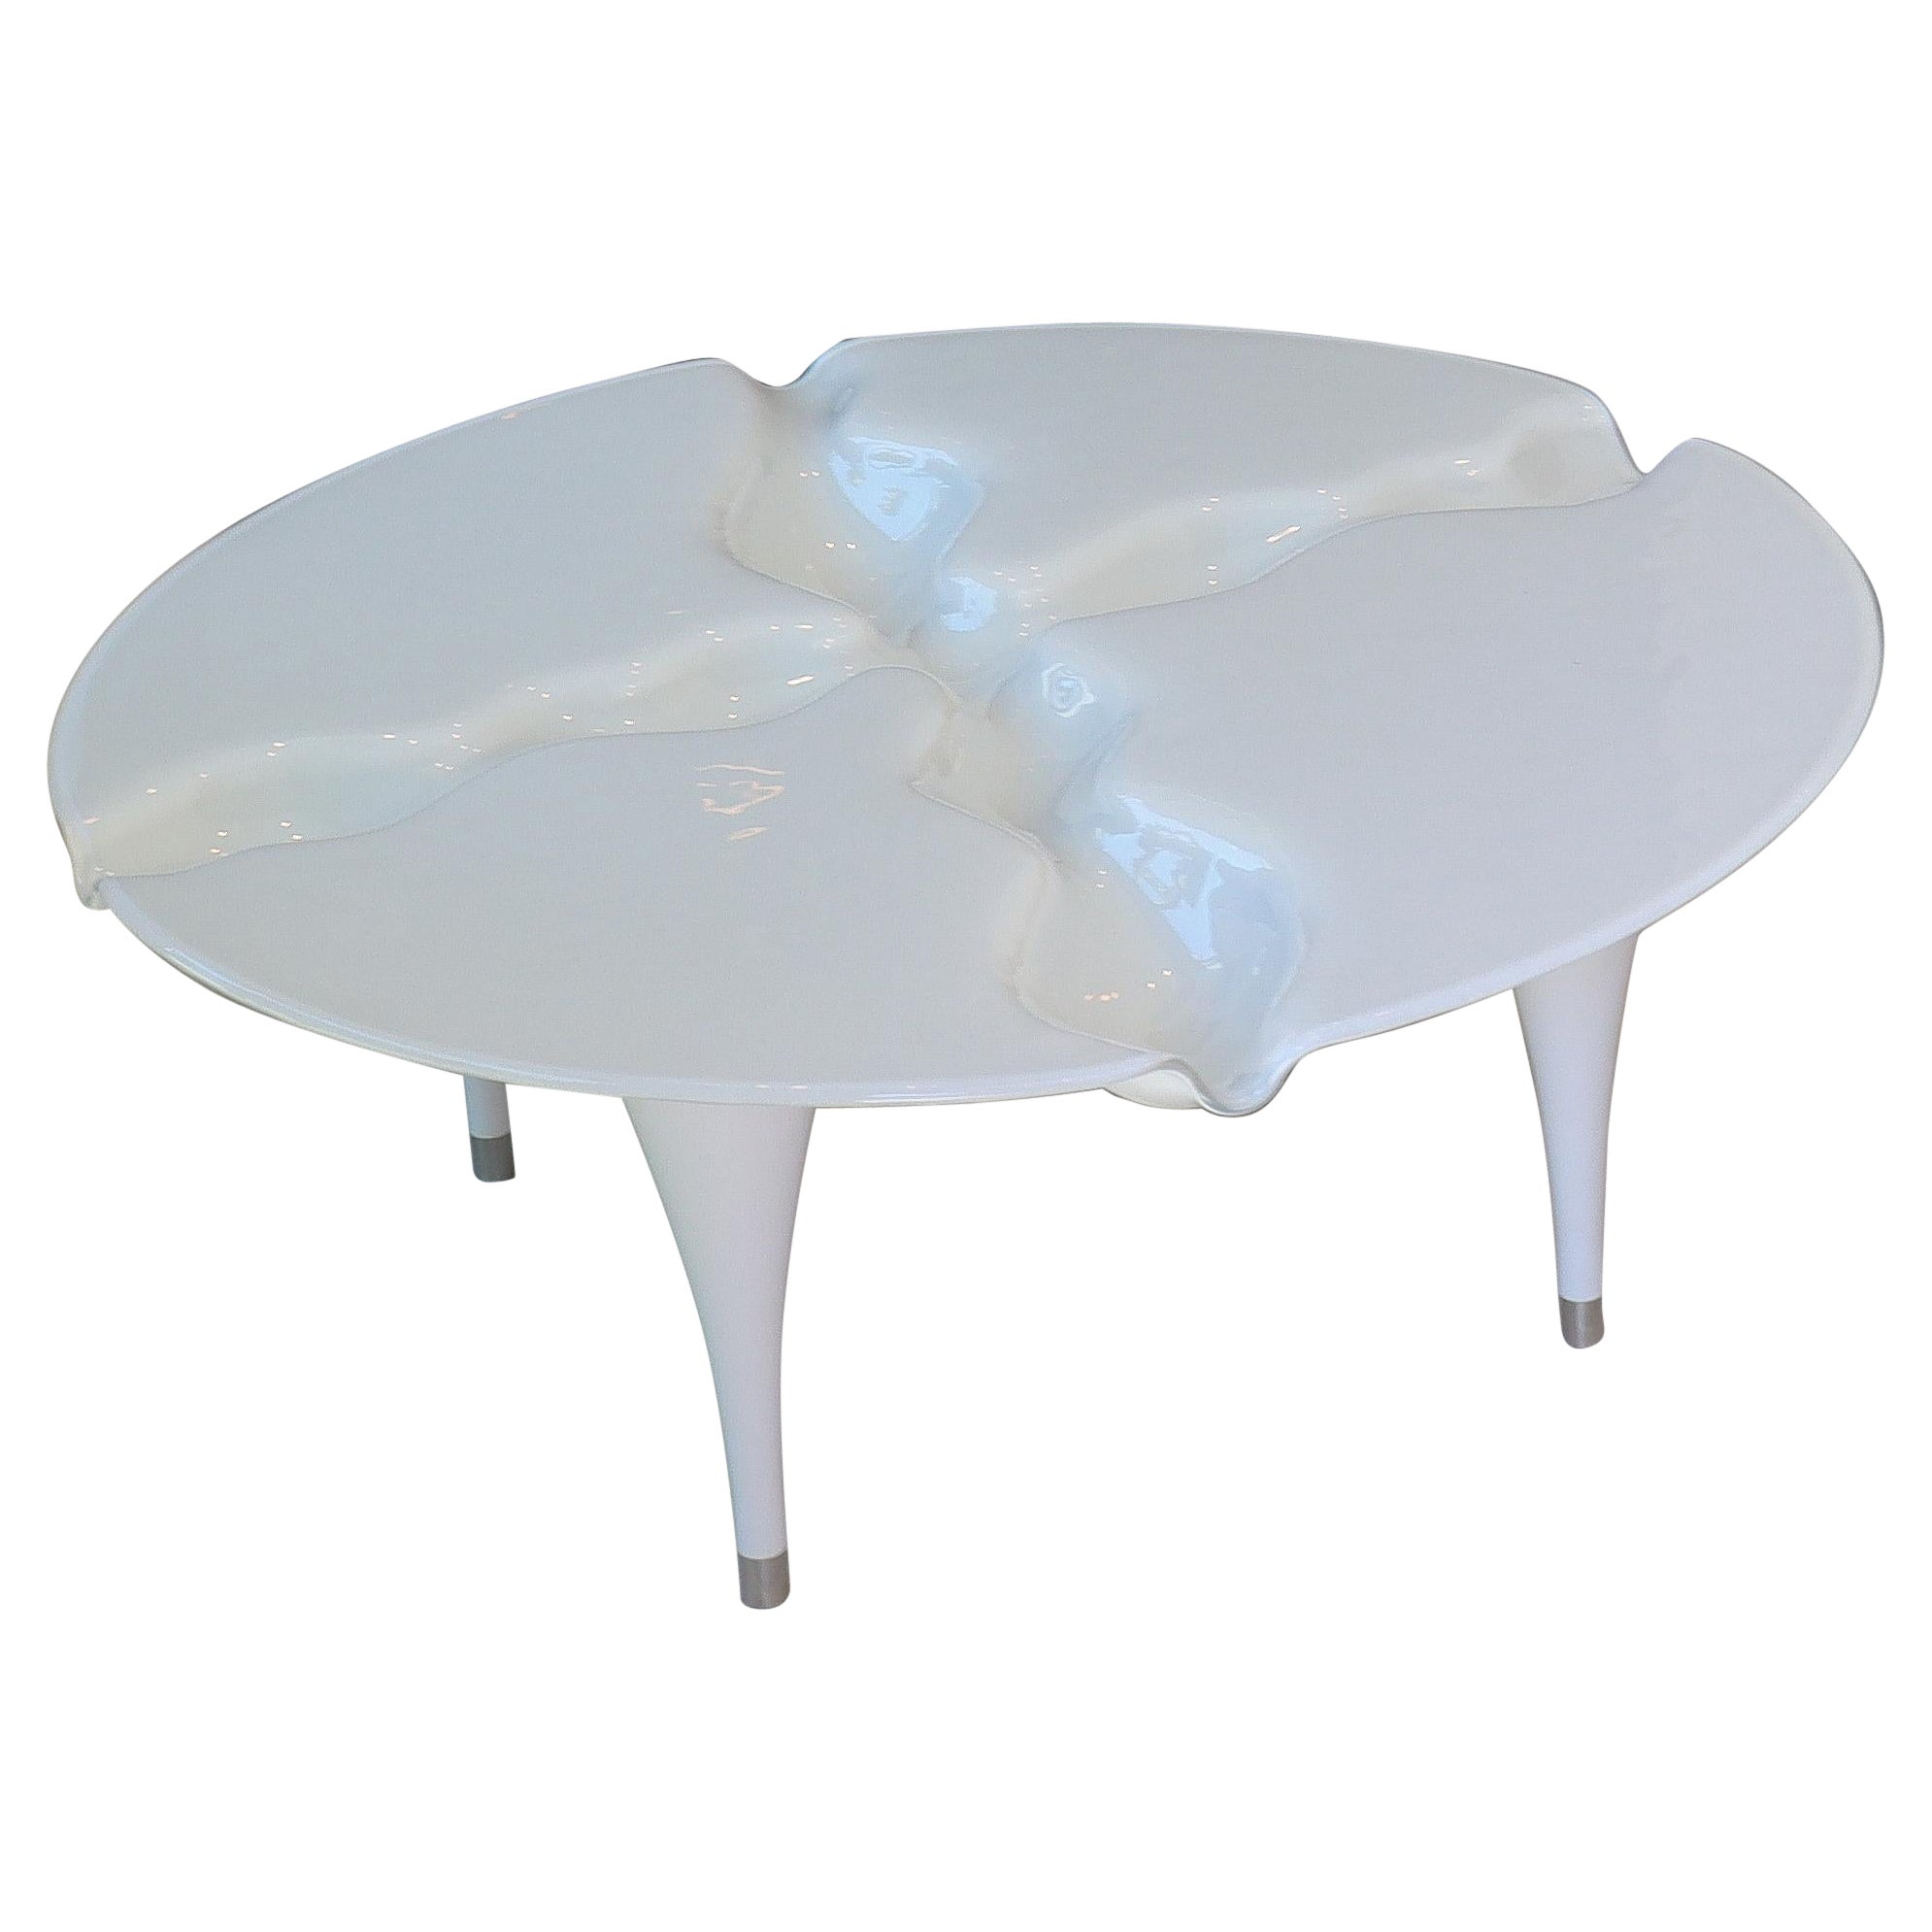 Plus Object Glass White Round Table For Sale